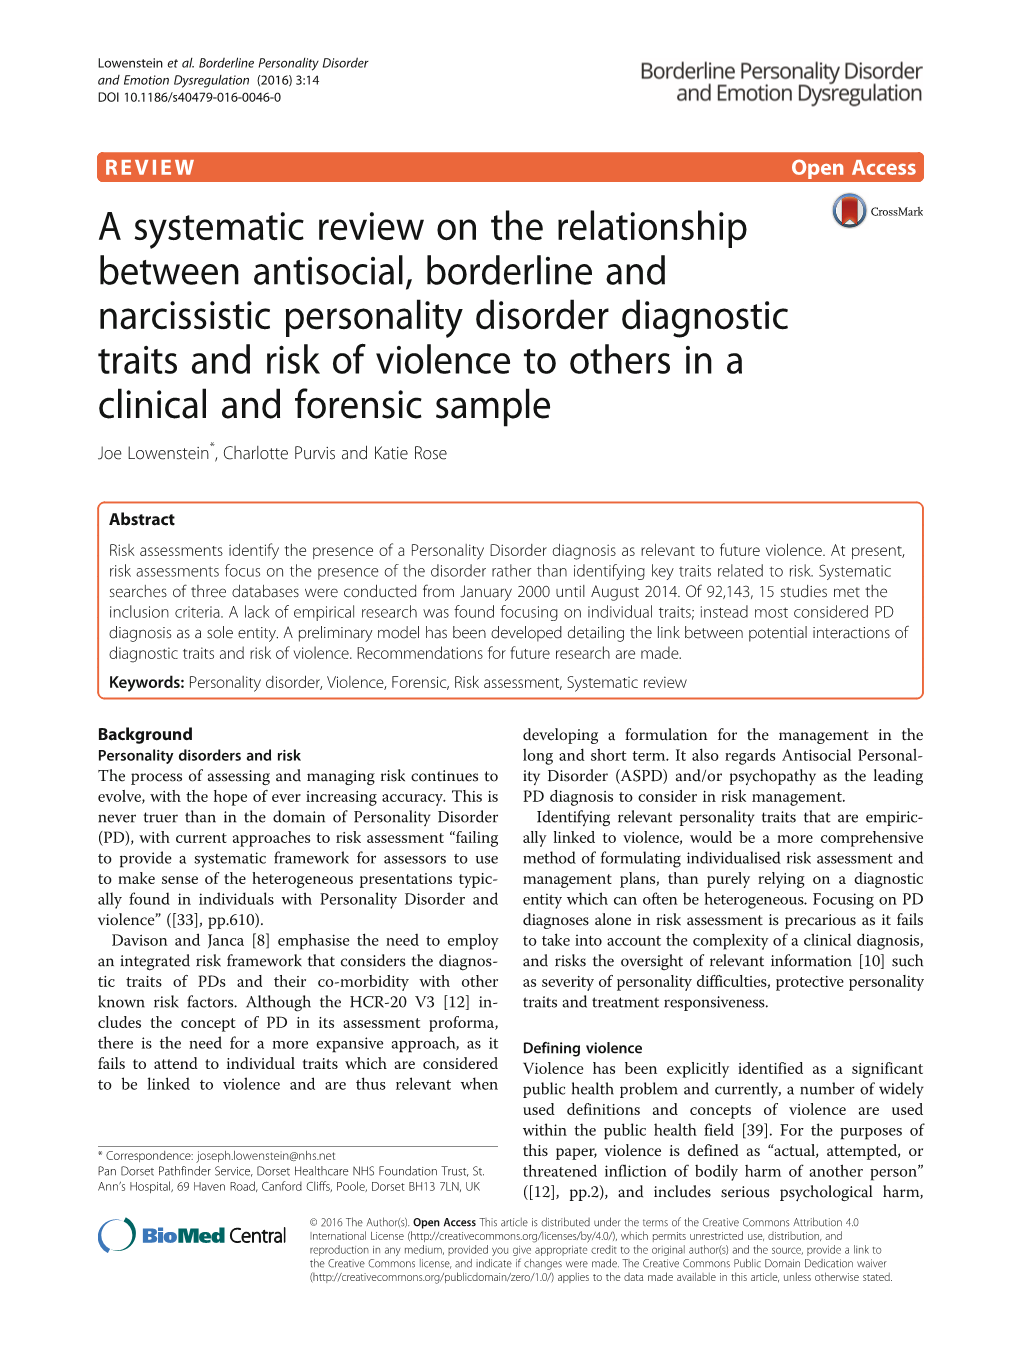 A Systematic Review on the Relationship Between Antisocial